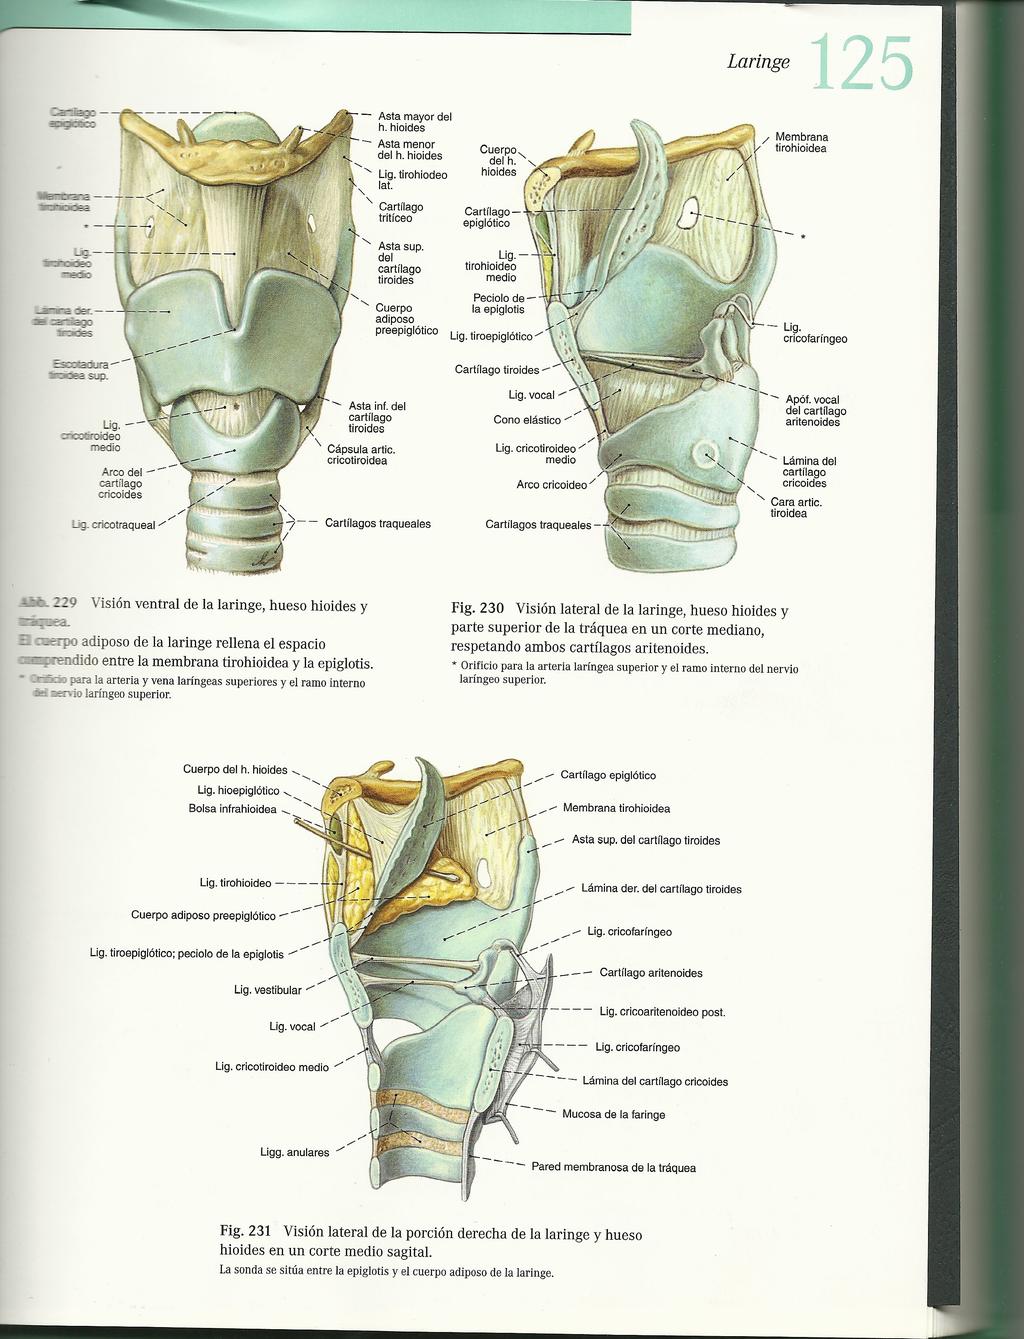 ELASTIC TISSUE EXTRINSIC LIGAMENTS (connect the laryngeal cartilages to the hyoid bone above and trachea below) Thyrohyoid membrane Ø Median thyrohyoid ligament Ø Lateral thyroyoid ligaments Ø